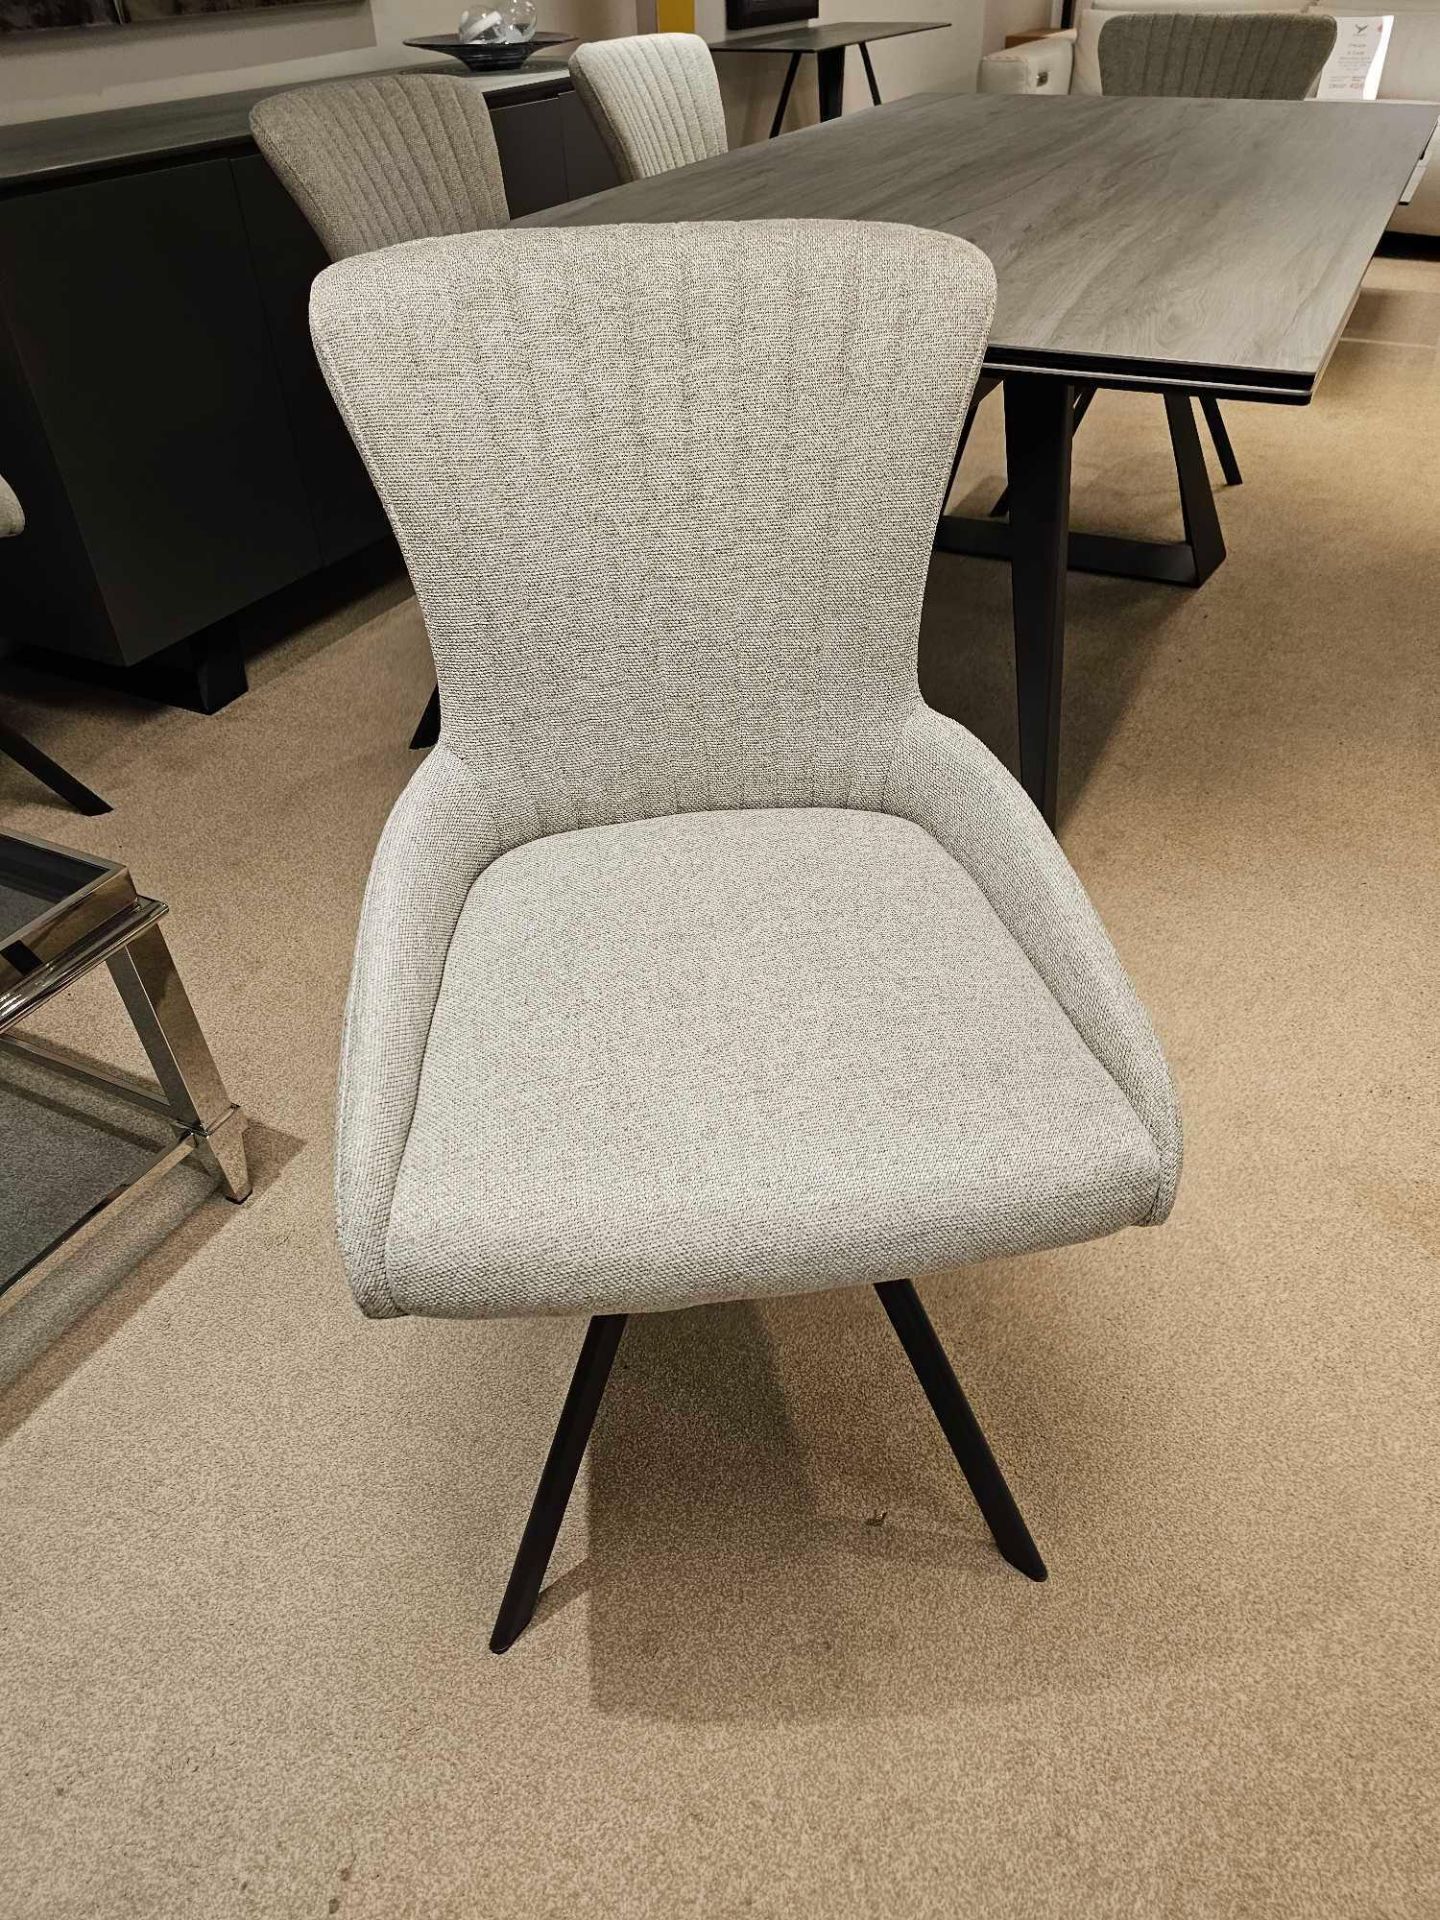 A Set of 6 x Maria Chairs by Kesterport Maria has the same self-return mechanism as many of the - Image 5 of 6